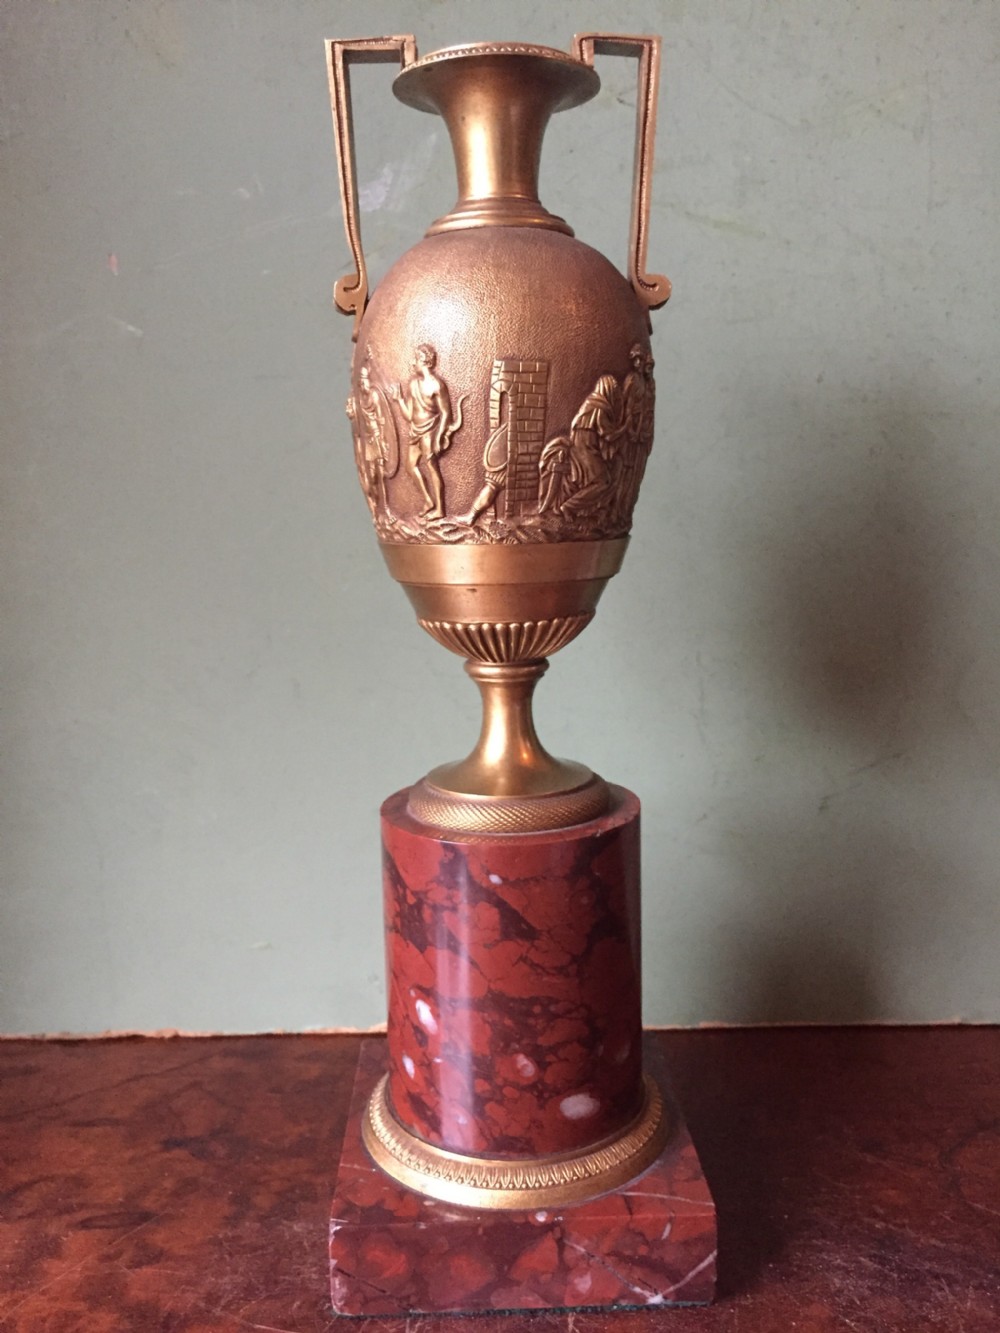 fine quality early c19th french neoclassical giltbronze urn on a 'rouge griotte' marble base